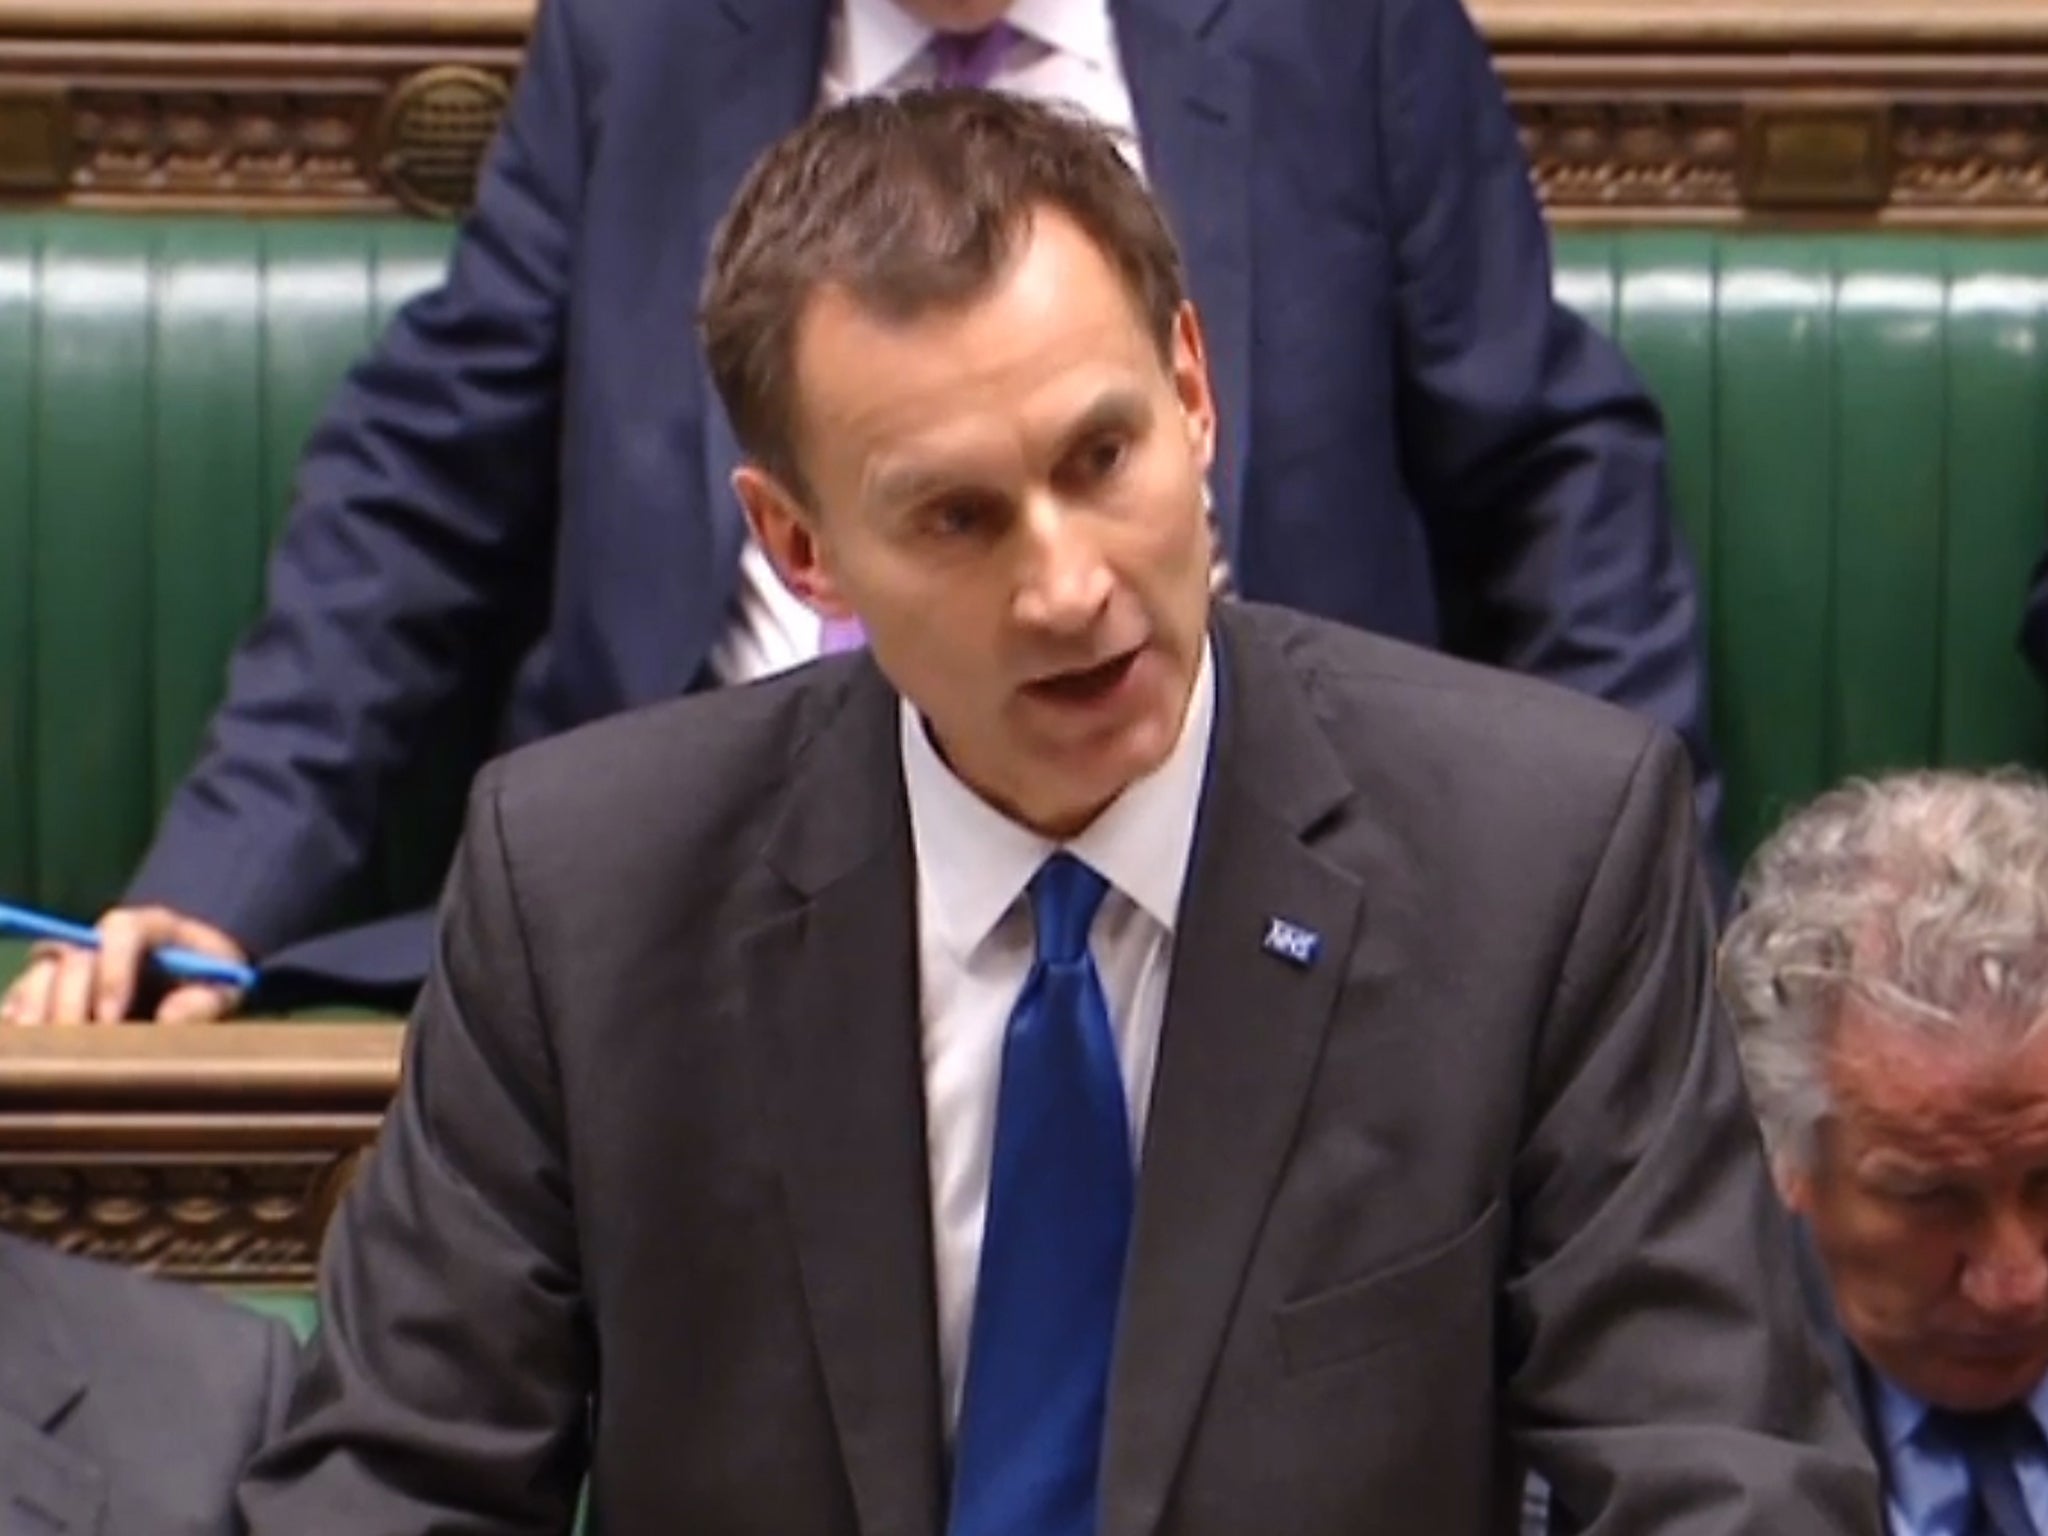 Jeremy Hunt delivering his statement in the House of Commons